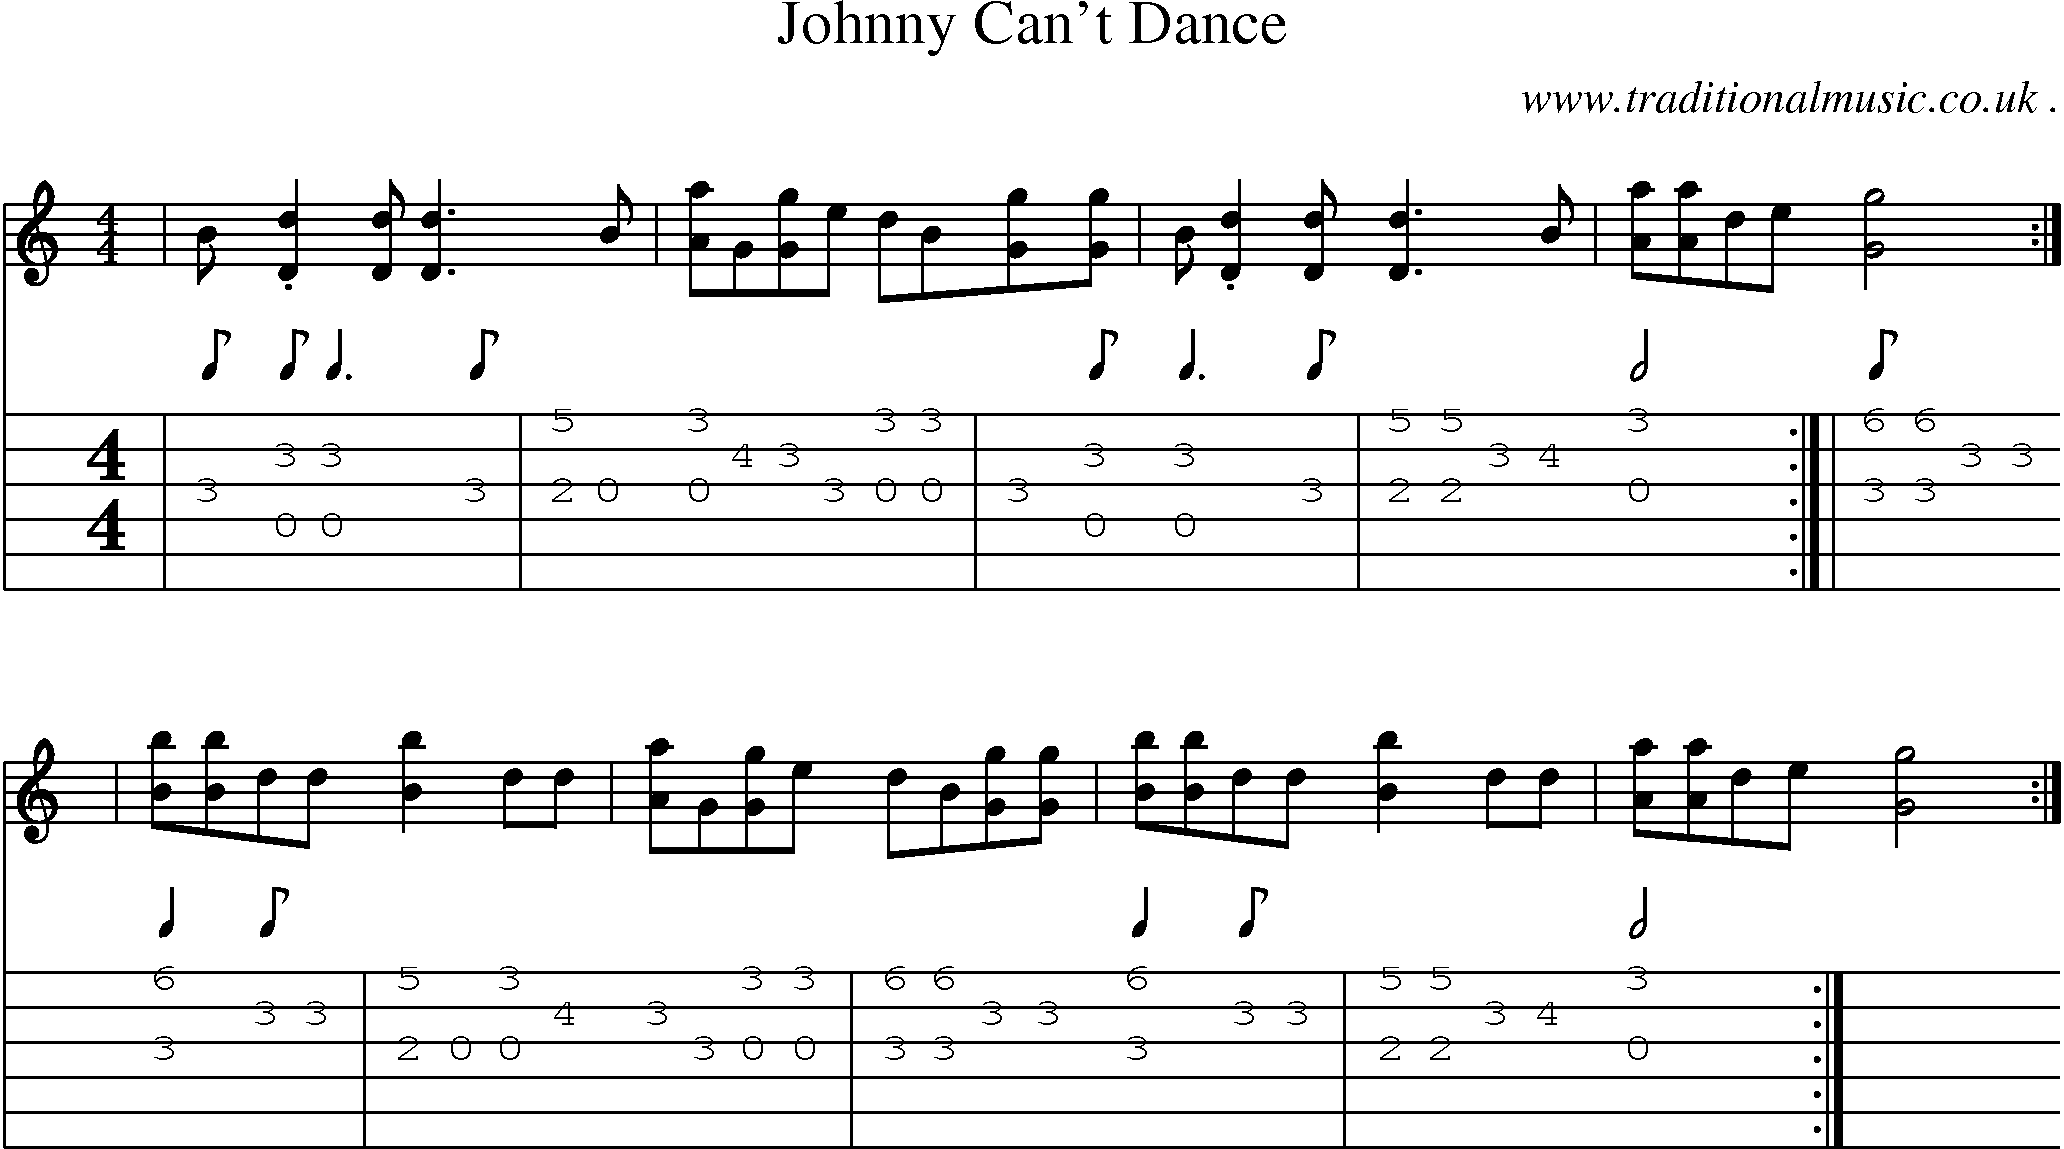 Music Score and Guitar Tabs for Johnny Cant Dance